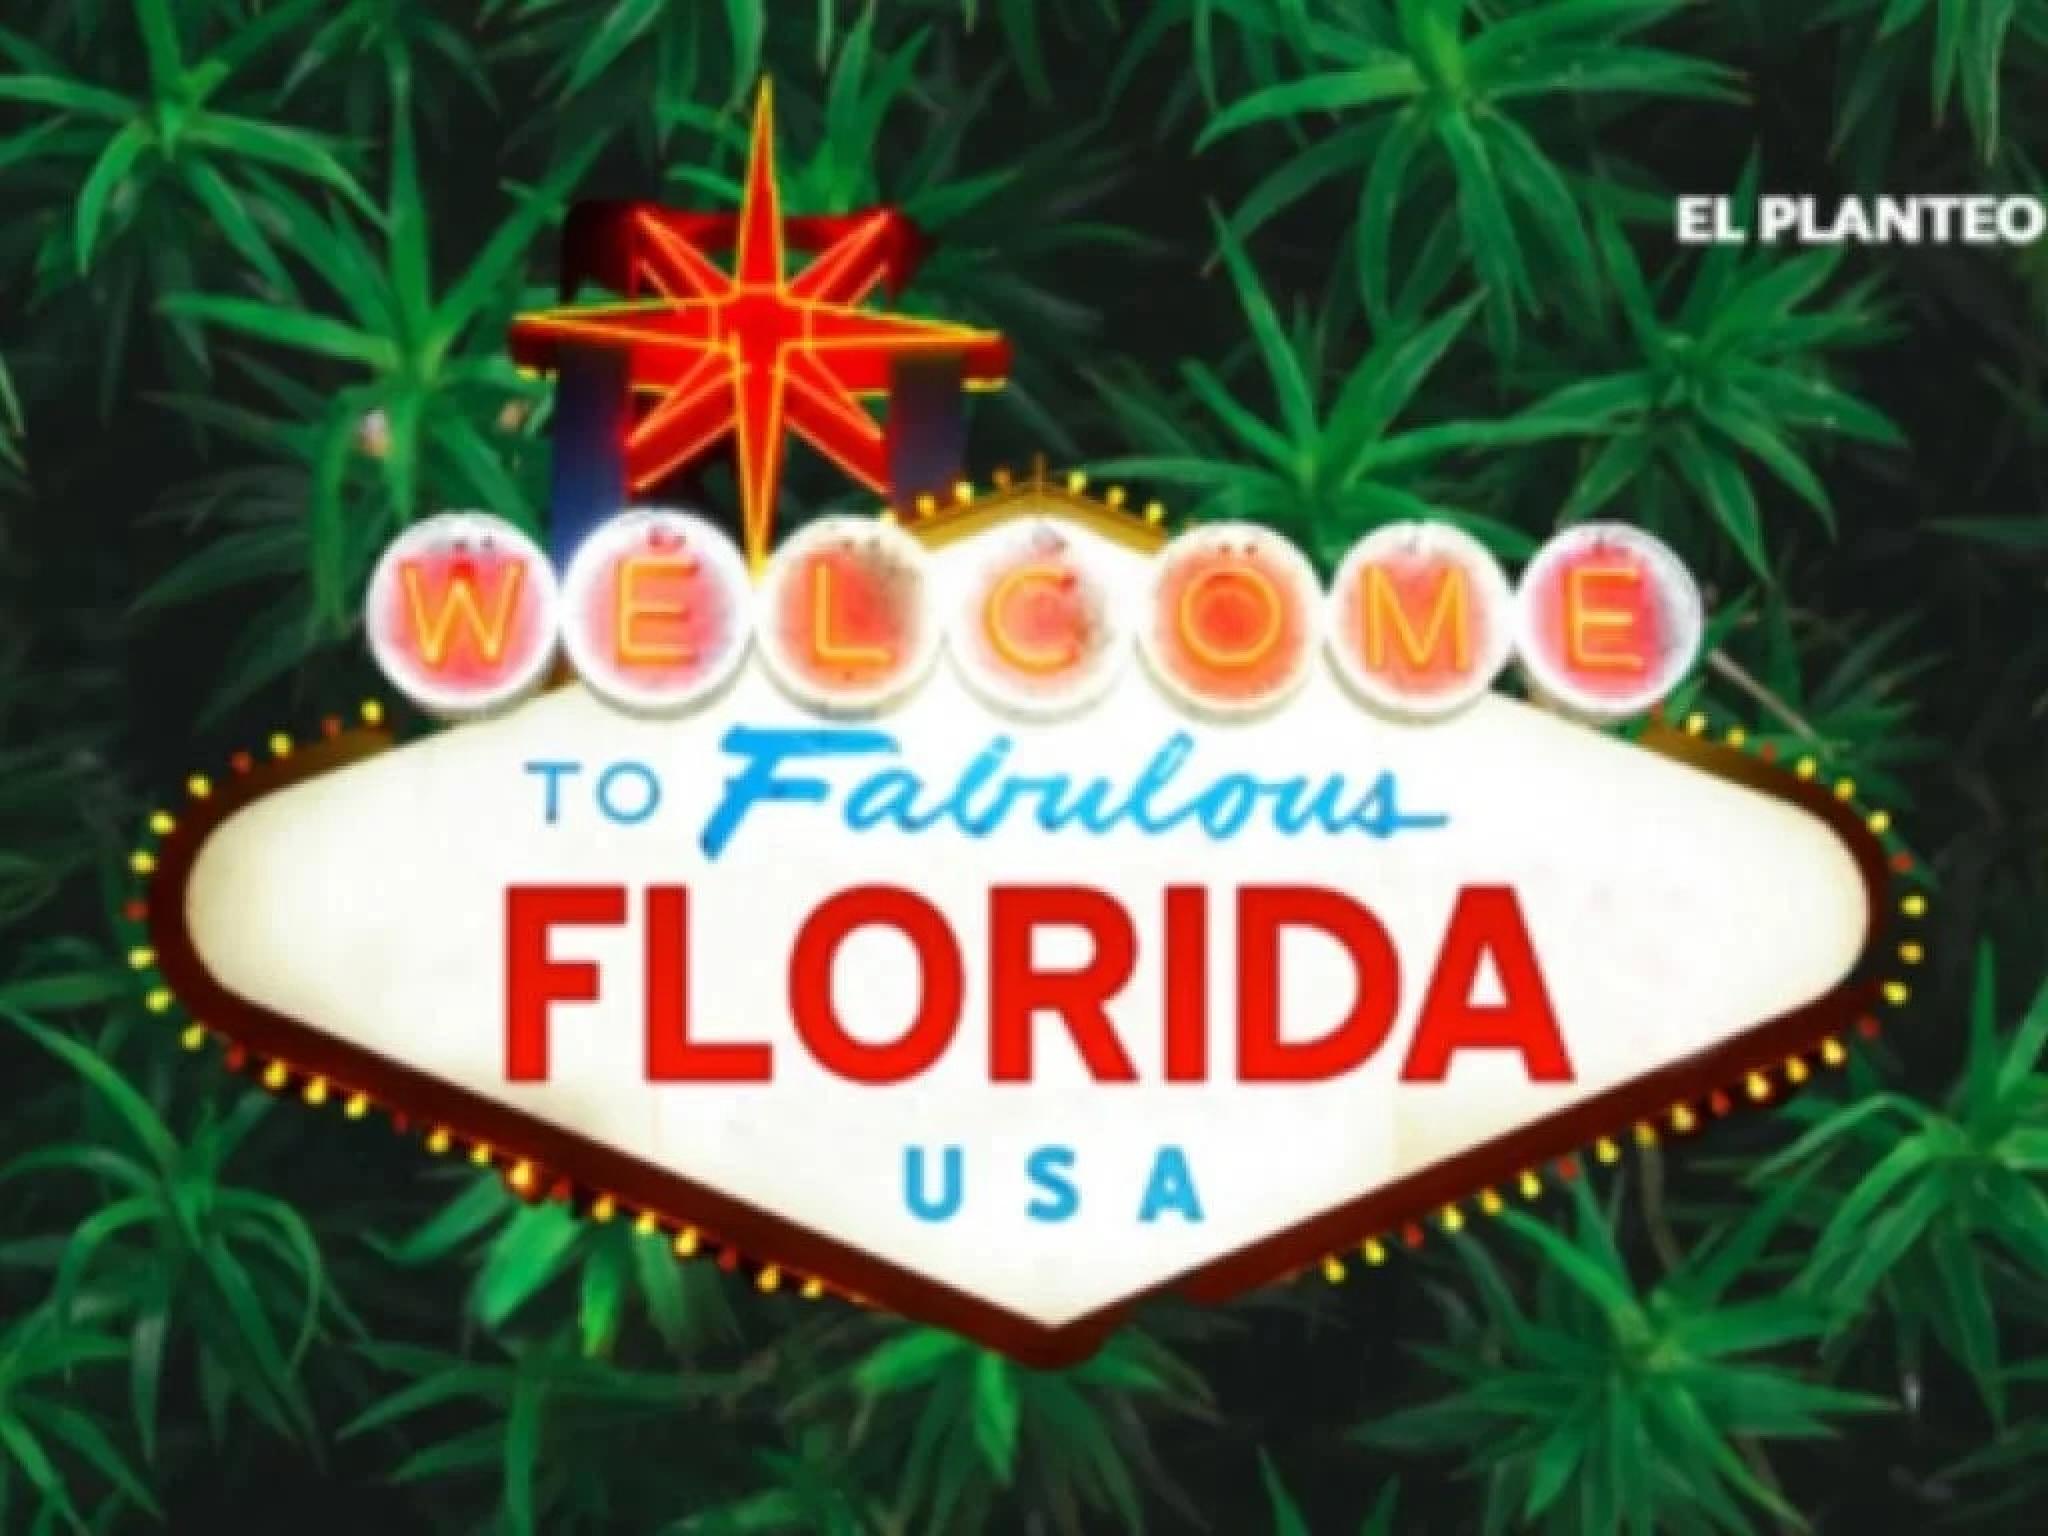  most-florida-marijuana-is-illegal-mom-cautions-against-dangers-of-unregulated-weed-in-new-cannabis-legalization-ad 